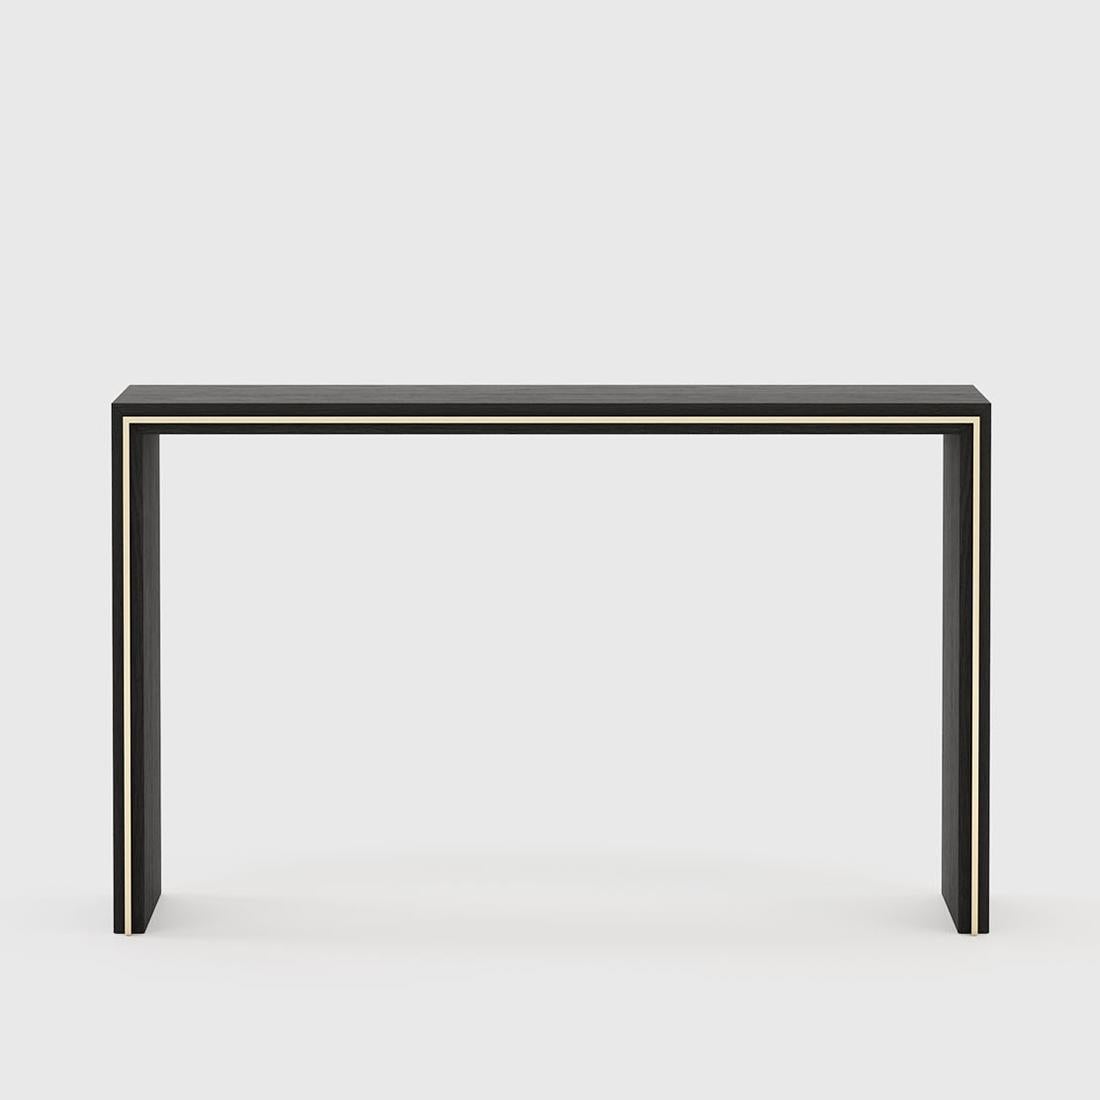 Console table gold line with structure ash wood
in matte blackened finish with stainless steel trim in gold finish.
   